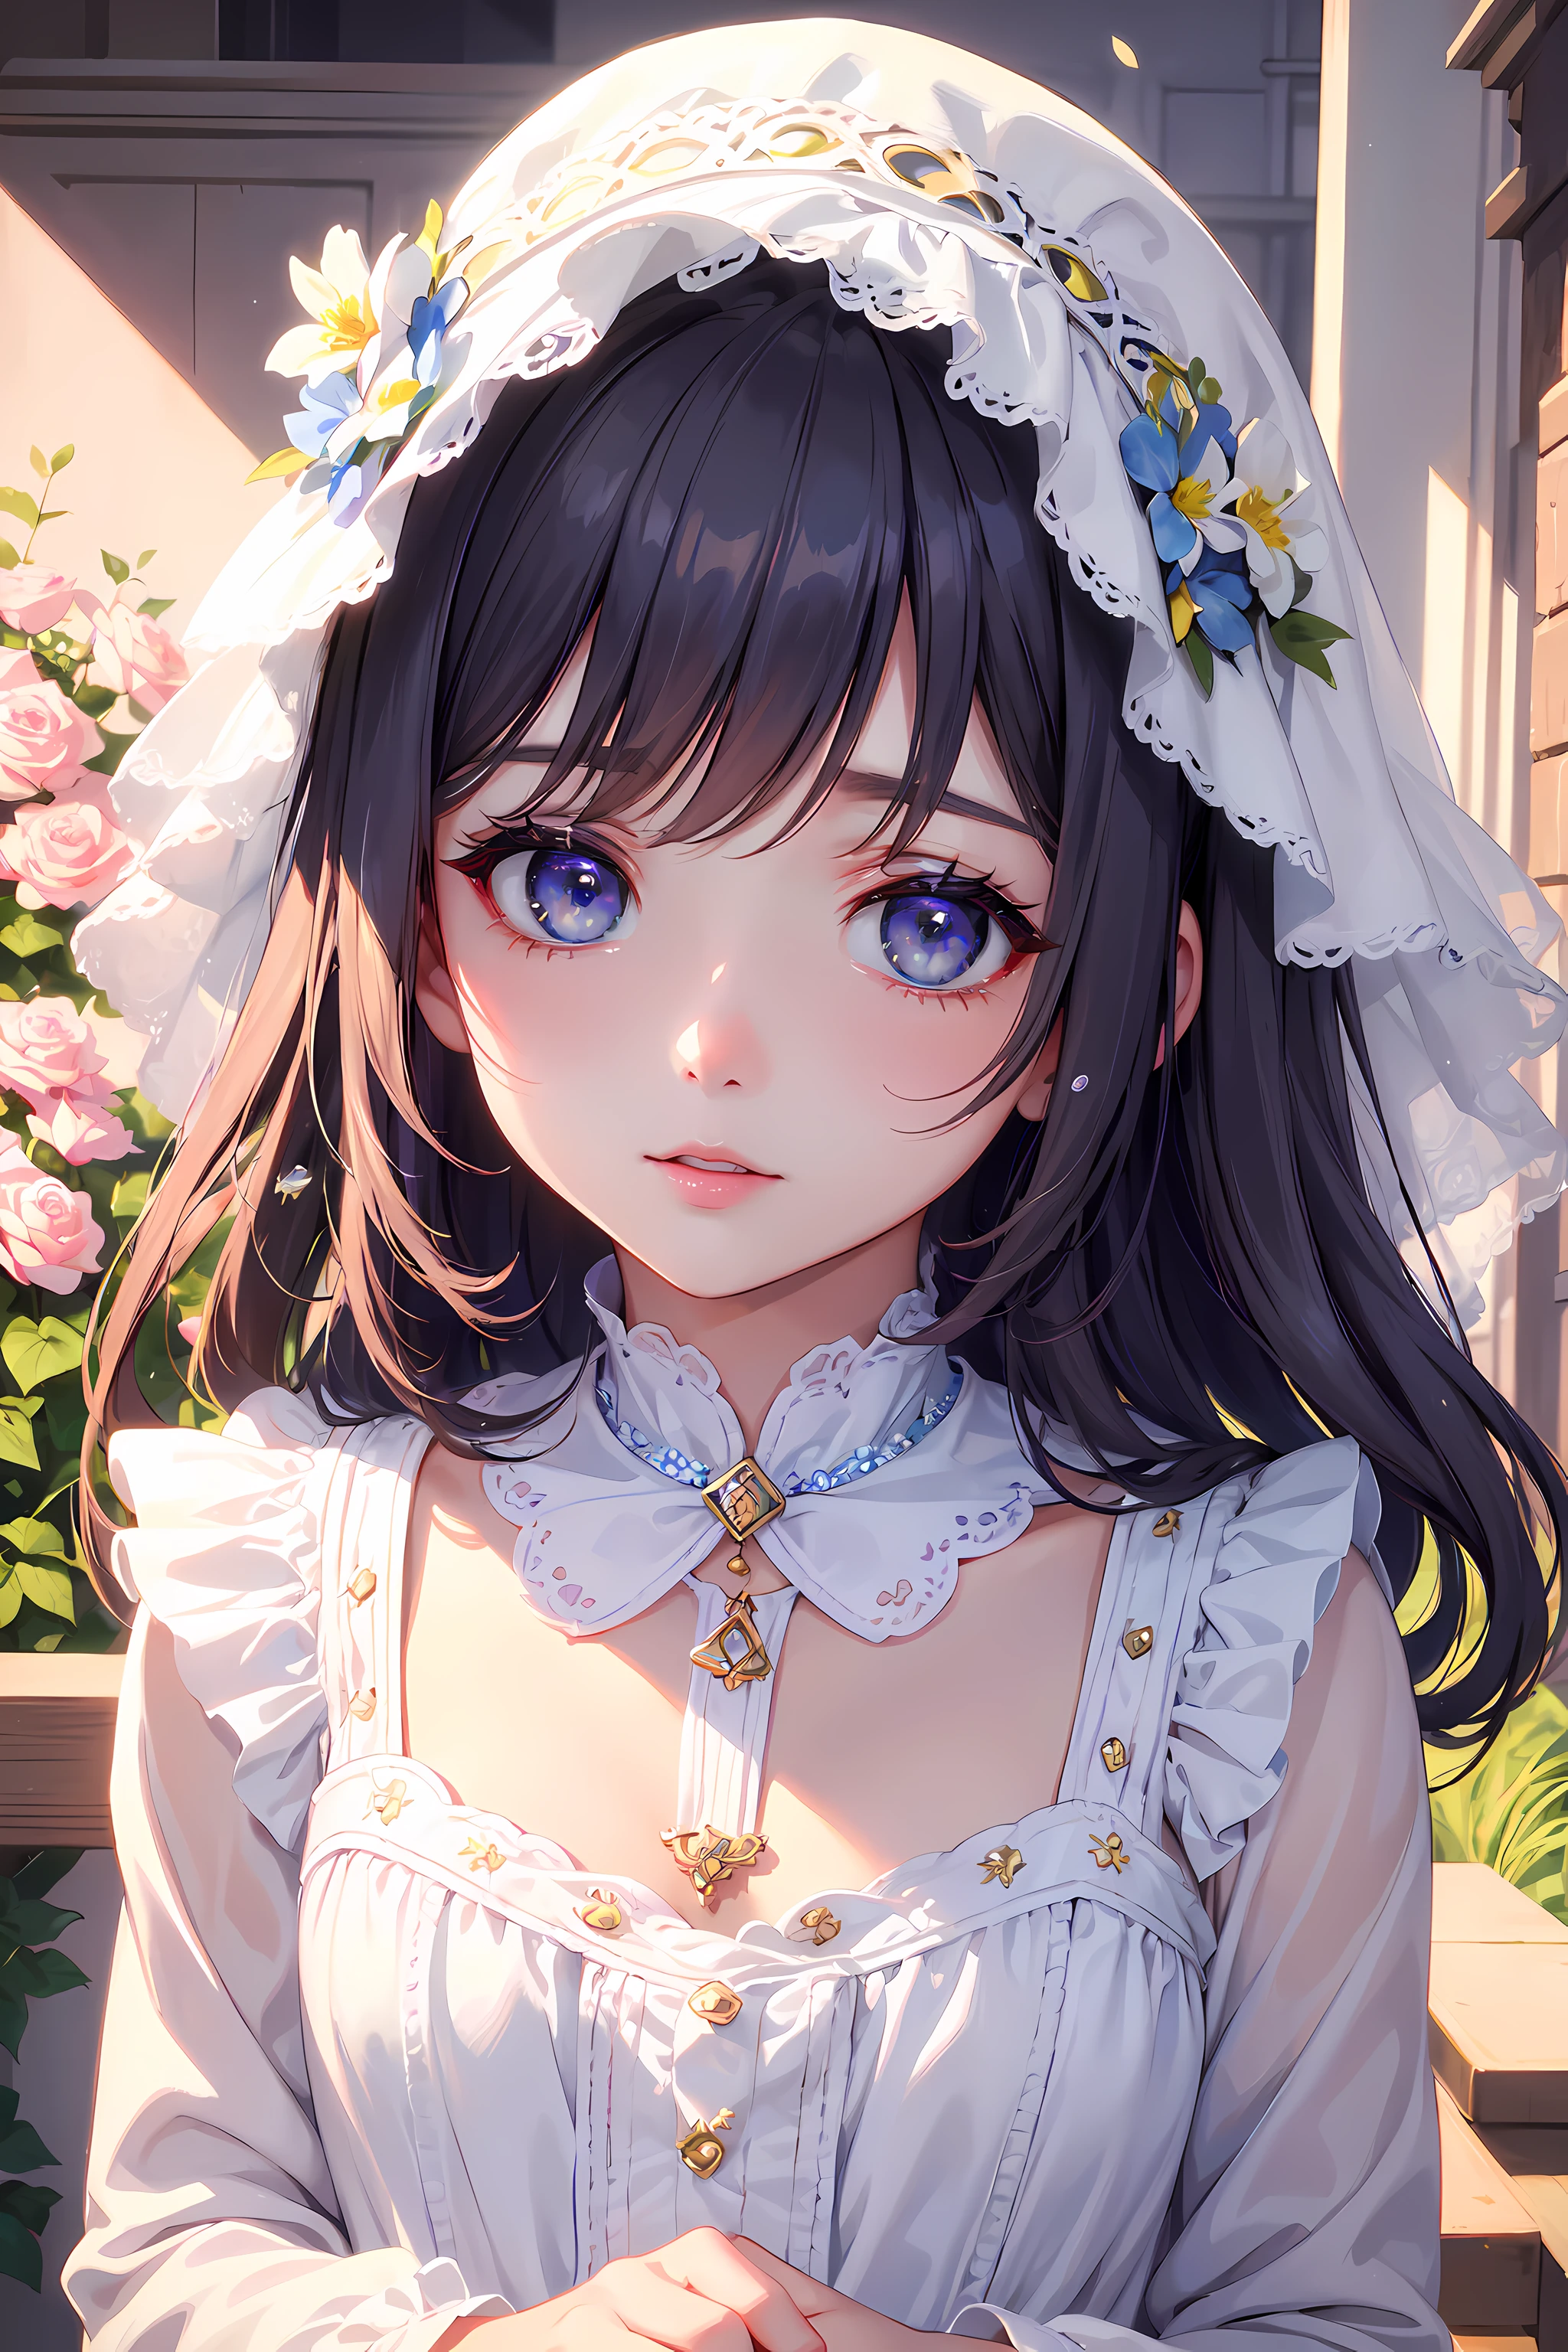 (cutest,best quality,ultra-detailed),cute girl with mesmerizing eyes, detailed lips, and long eyelashes in a solo portrait, with a soft and warm color palette, capturing the innocence and charm of youth. The girl is dressed in a beautiful pastel outfit, surrounded by a dreamy garden filled with colorful flowers. The artwork is a mix of traditional illustration and digital painting techniques, resulting in a visually stunning and captivating masterpiece. The lighting is delicate, highlighting the girl's features and creating a gentle glow that enhances the overall charm of the painting.